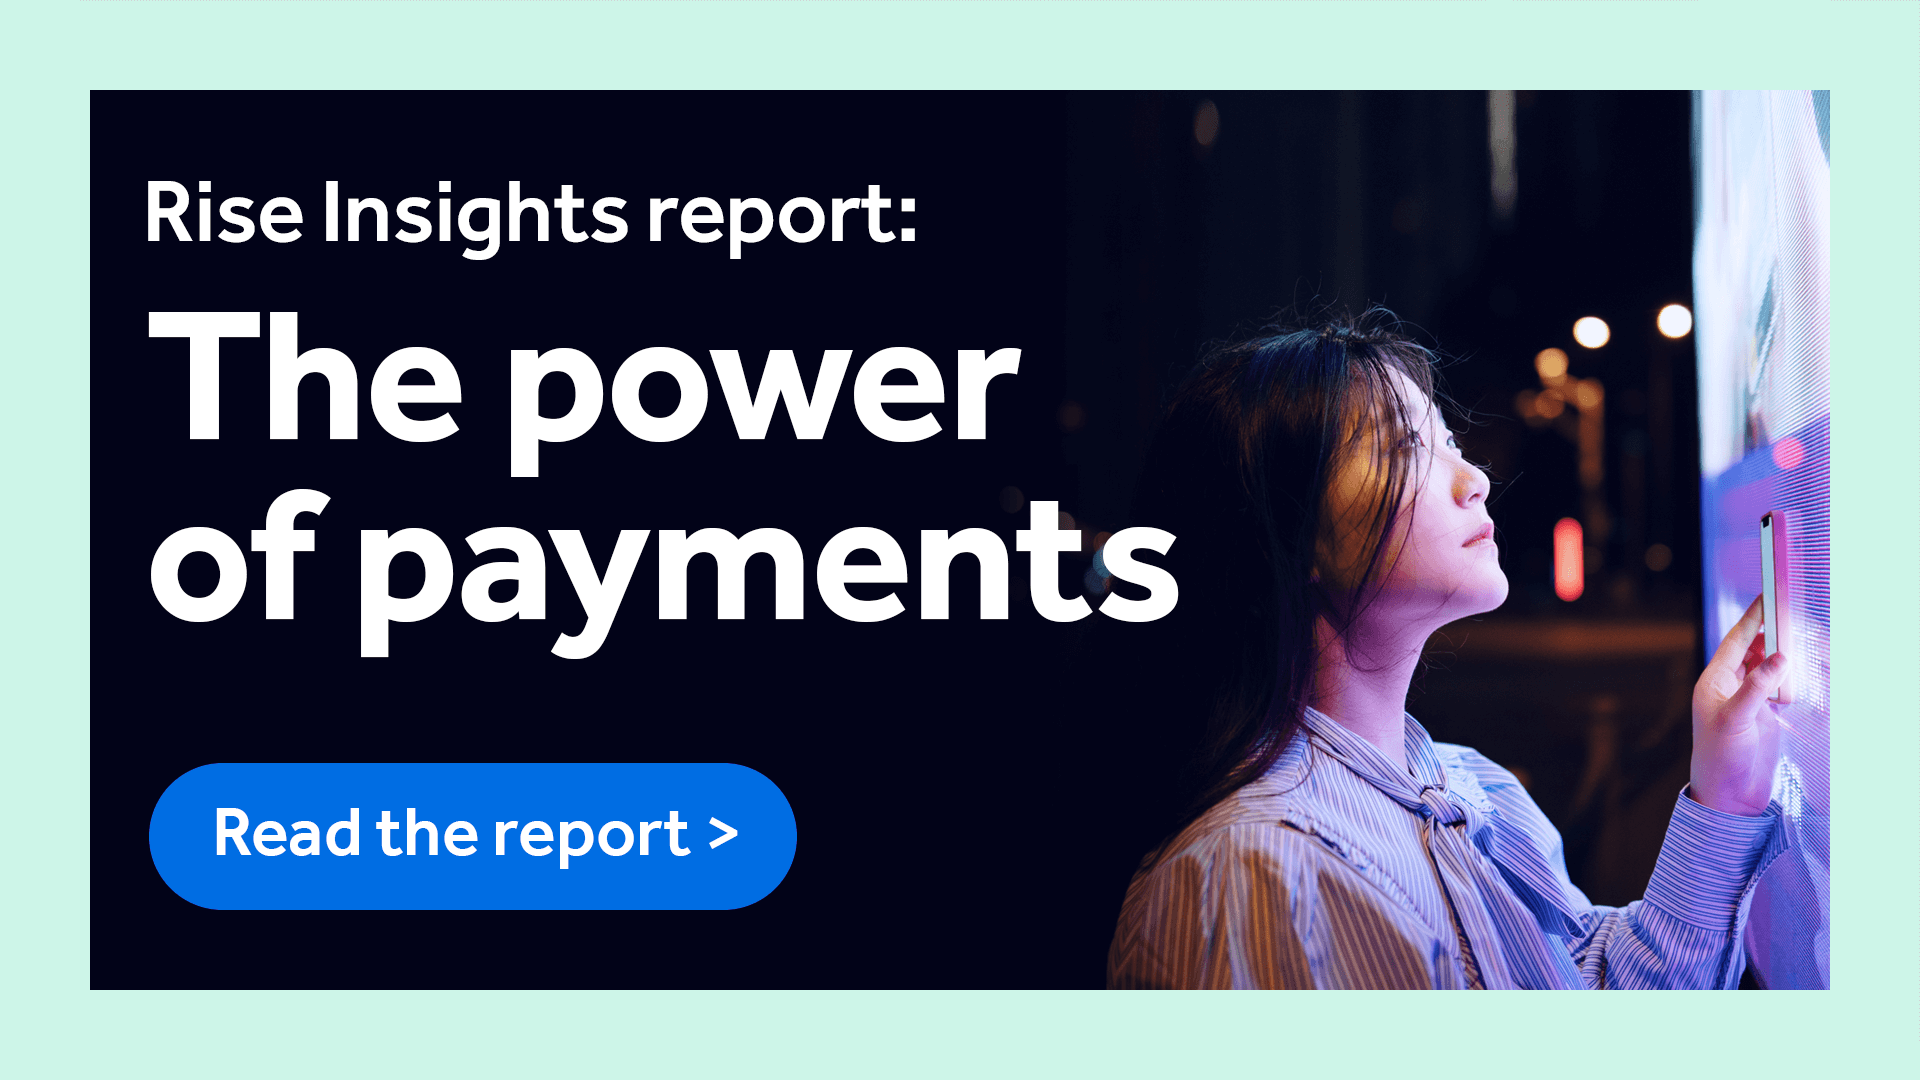 The power of payments